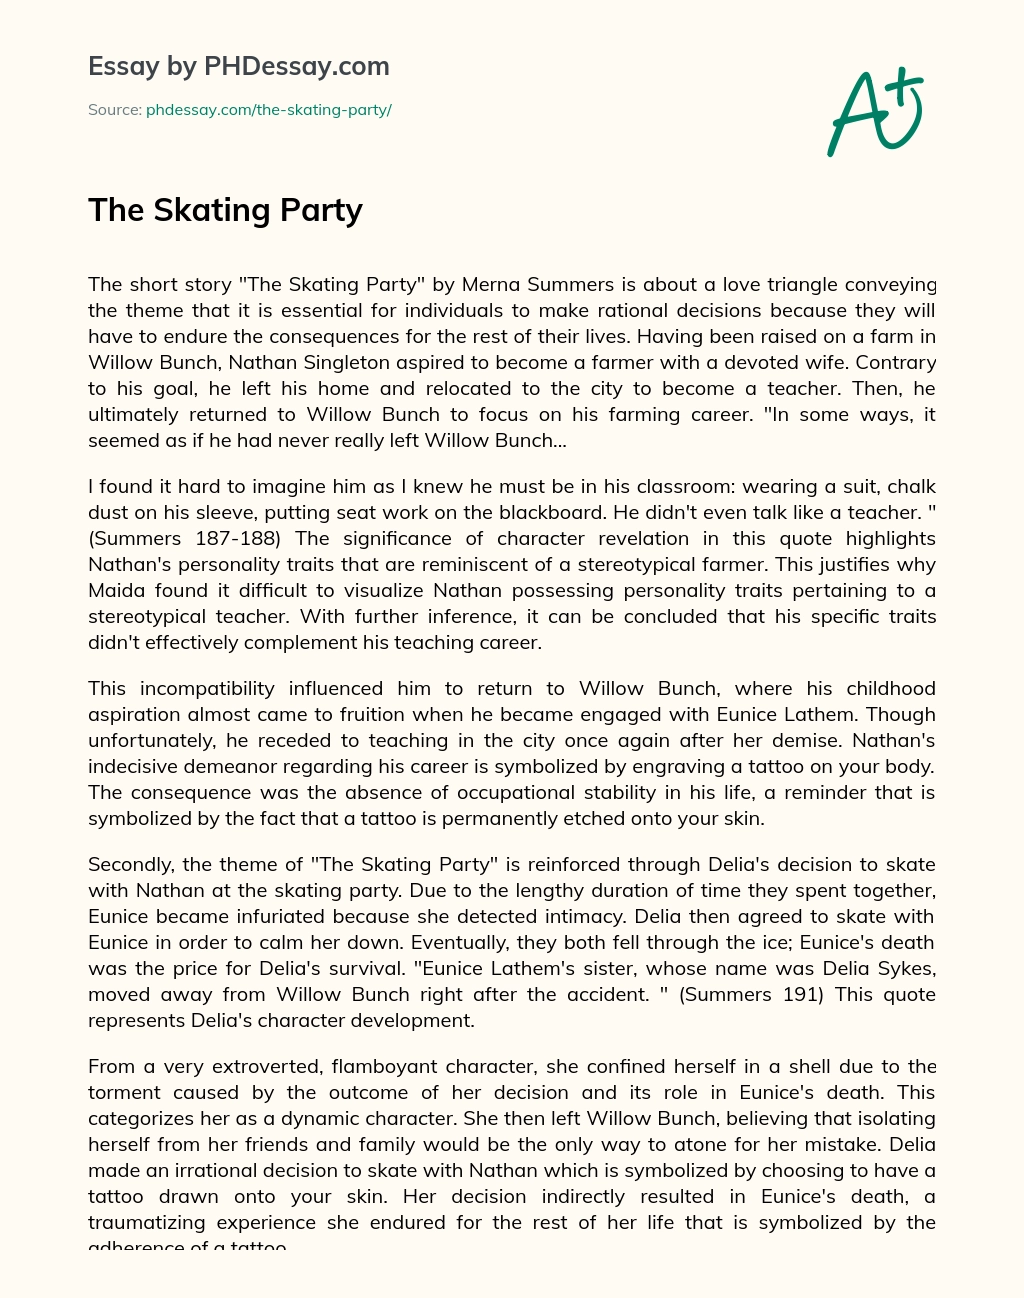 The Skating Party essay